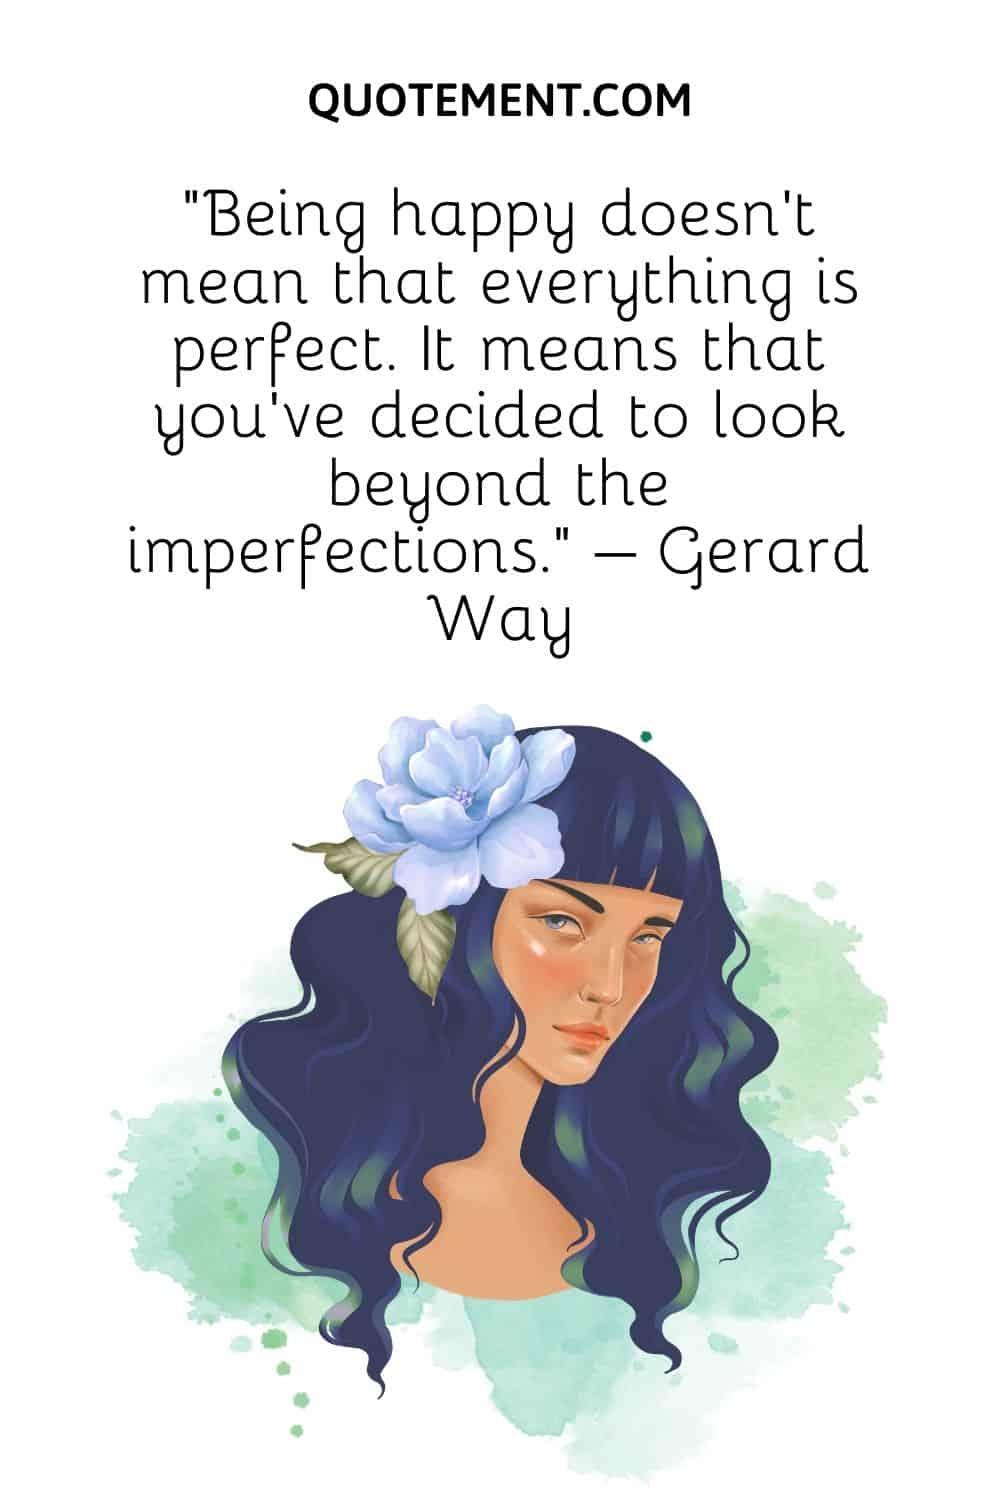 Being happy doesn’t mean that everything is perfect. It means that you’ve decided to look beyond the imperfections. – Gerard Way